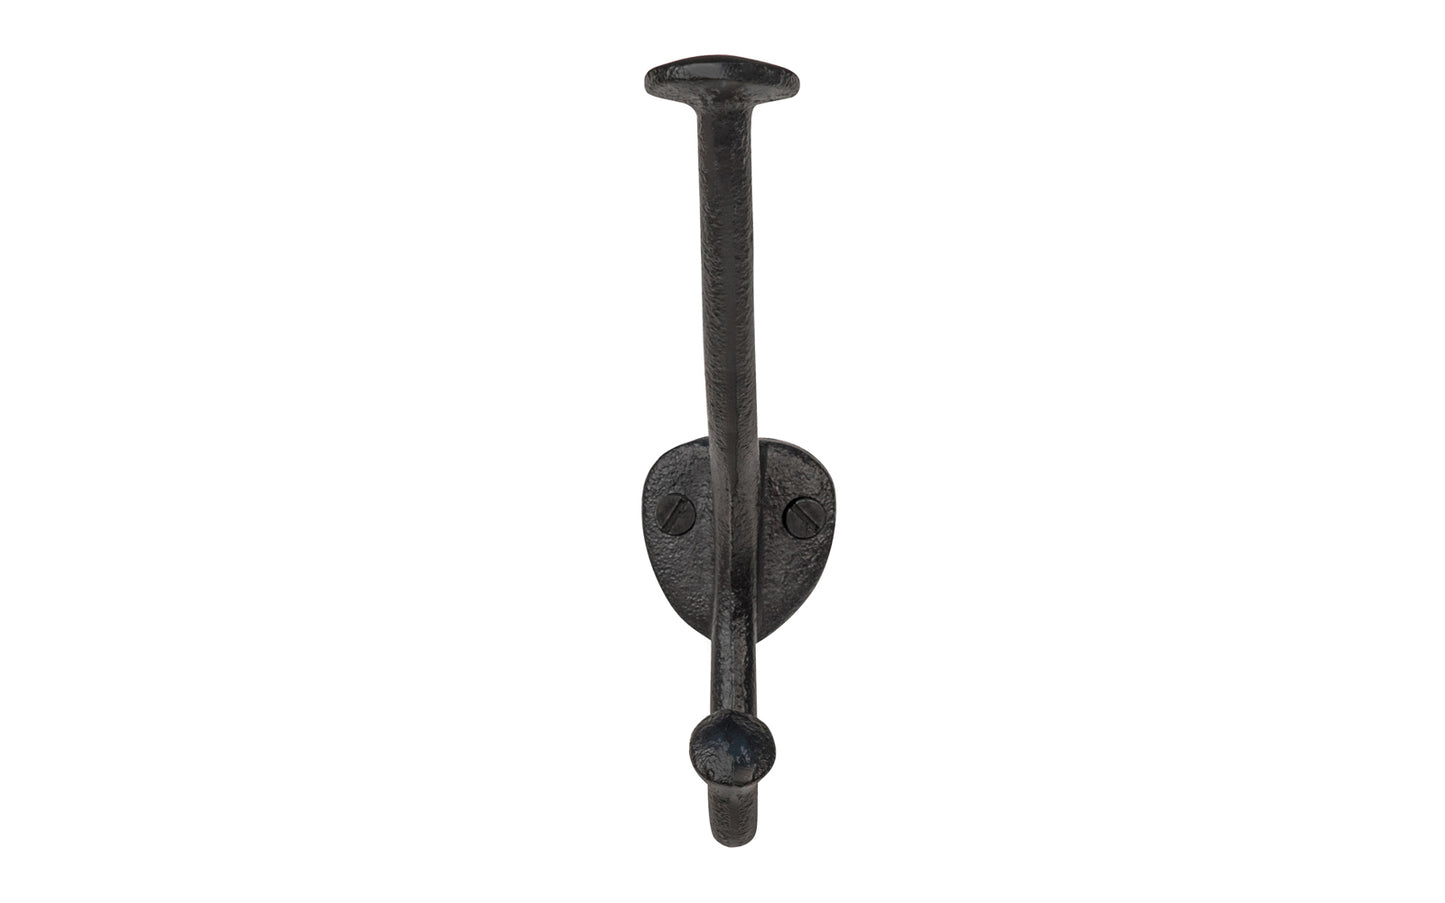 Vintage-style black cast-iron hall tree hook designed in the Art Nouveau style of hardware. Great for use in hallways, hall trees, coat racks, kitchens, bedrooms, & many other places. The double hook is made of strong cast iron material, making it durable for heavy coats, bags, & clothing 5-1/2" high hook. 